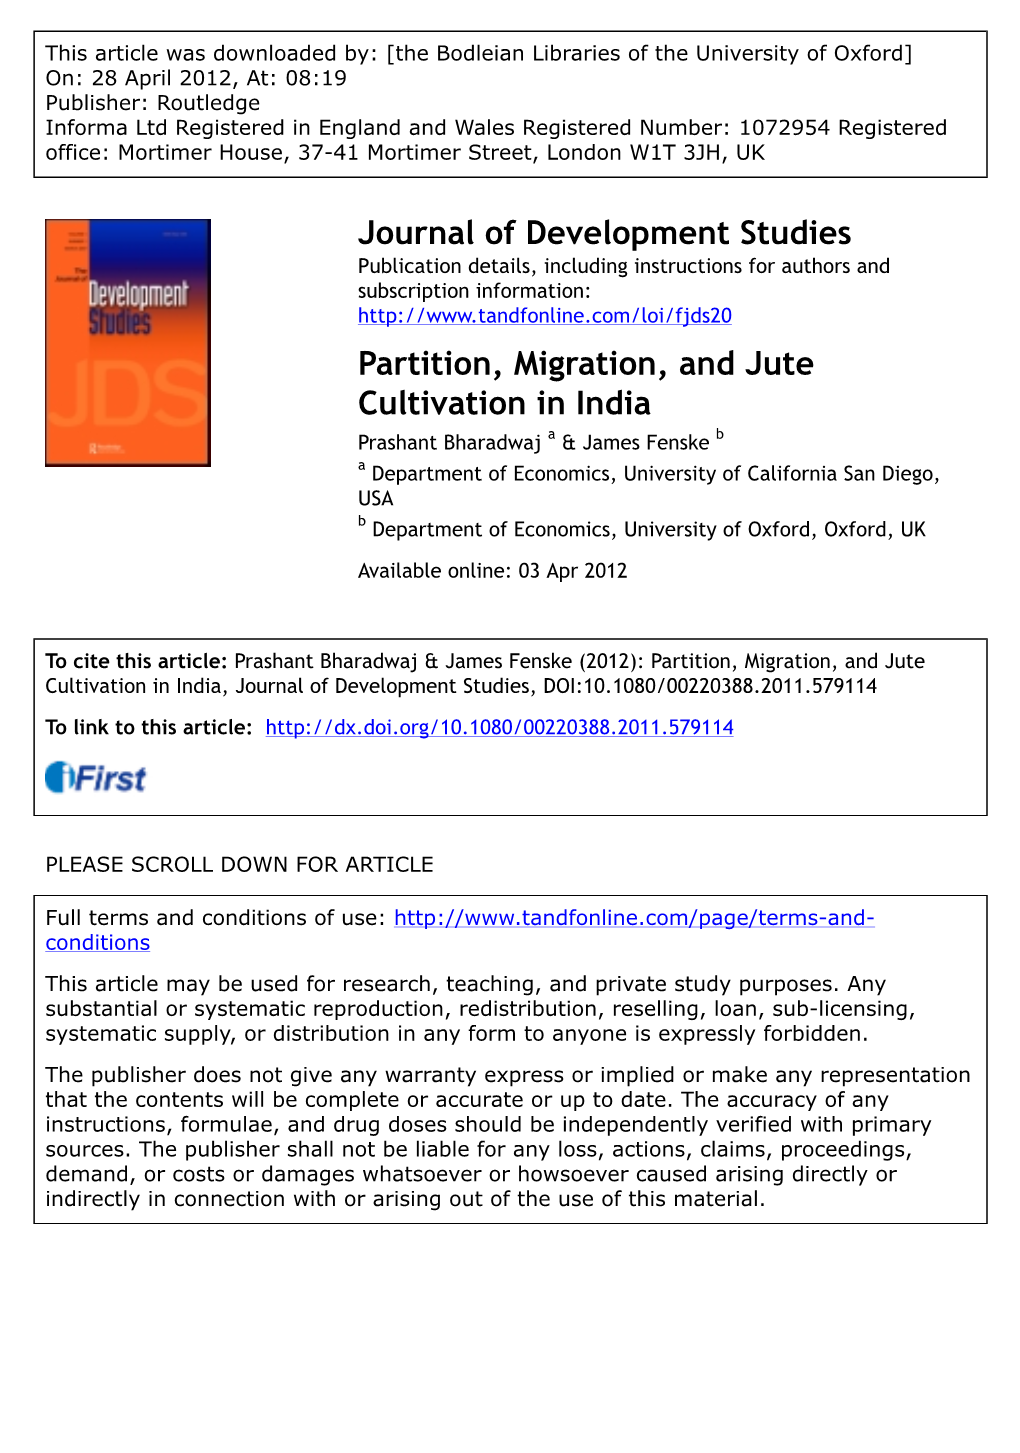 Partition, Migration, and Jute Cultivation in India